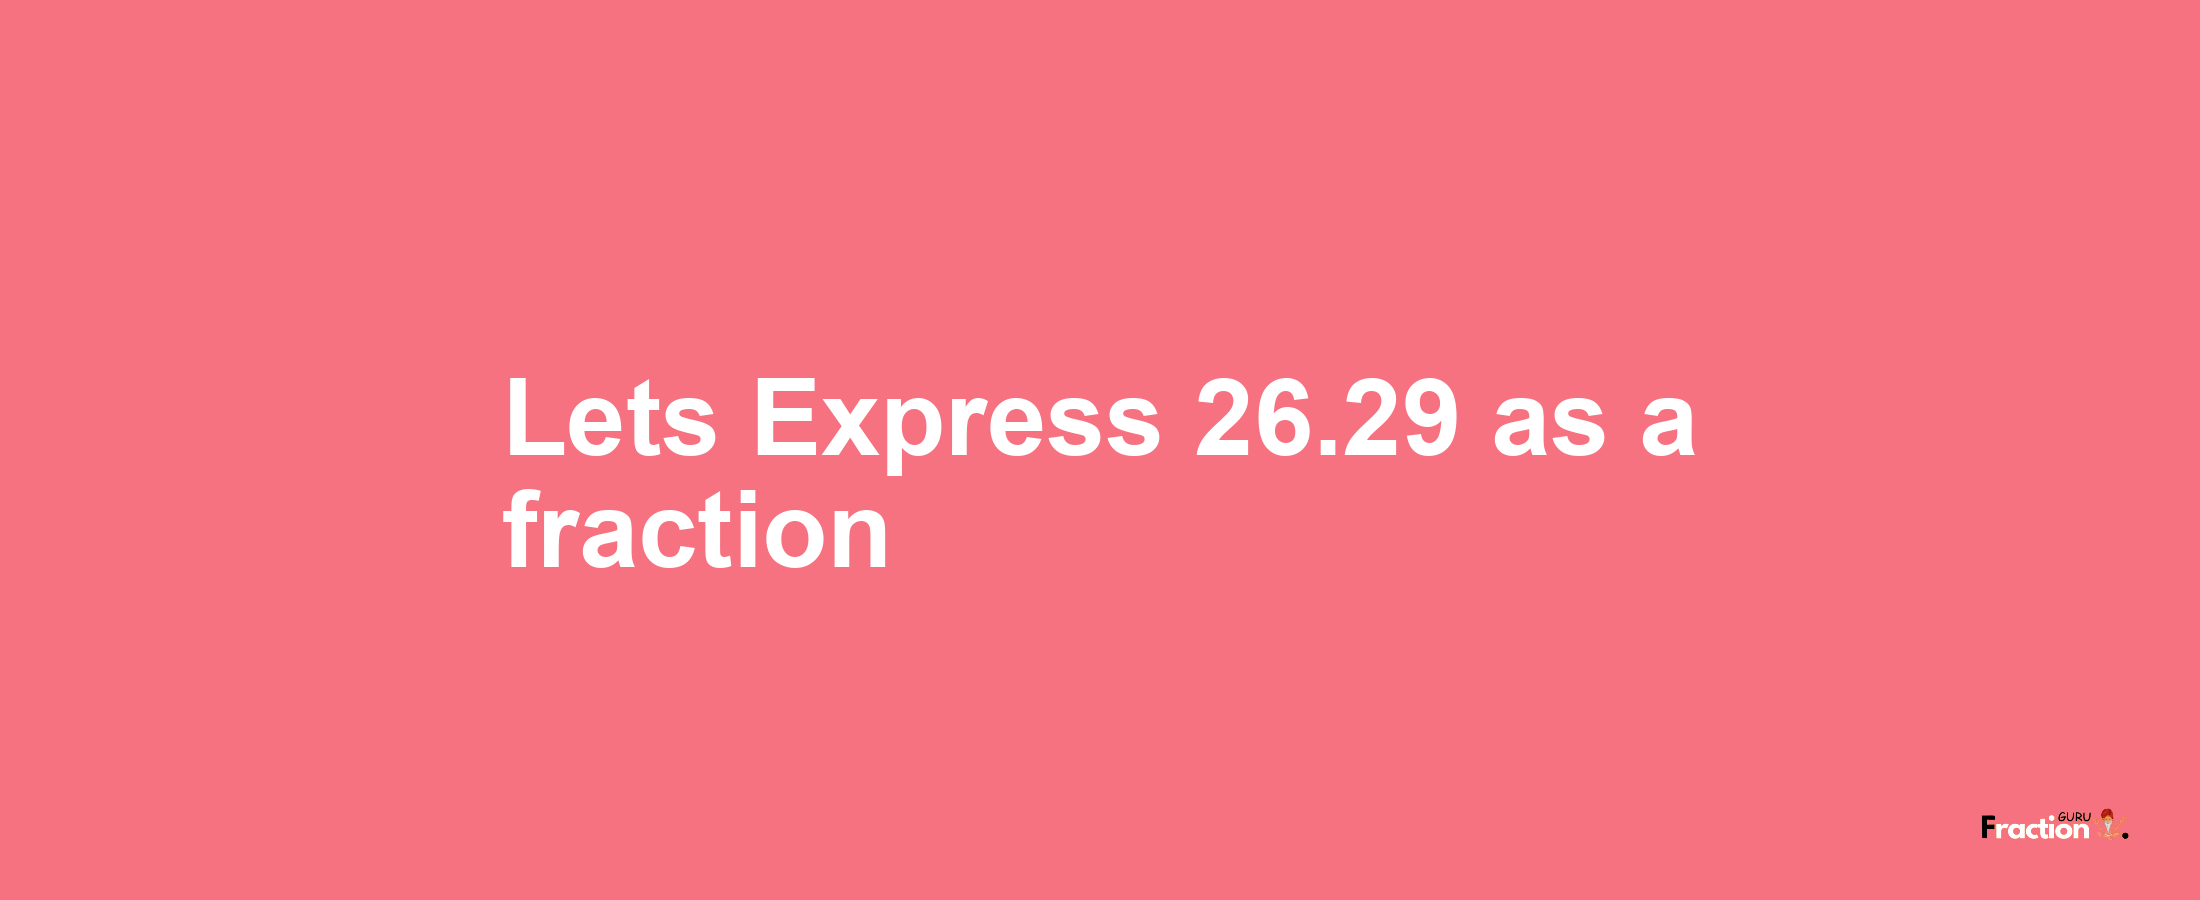 Lets Express 26.29 as afraction